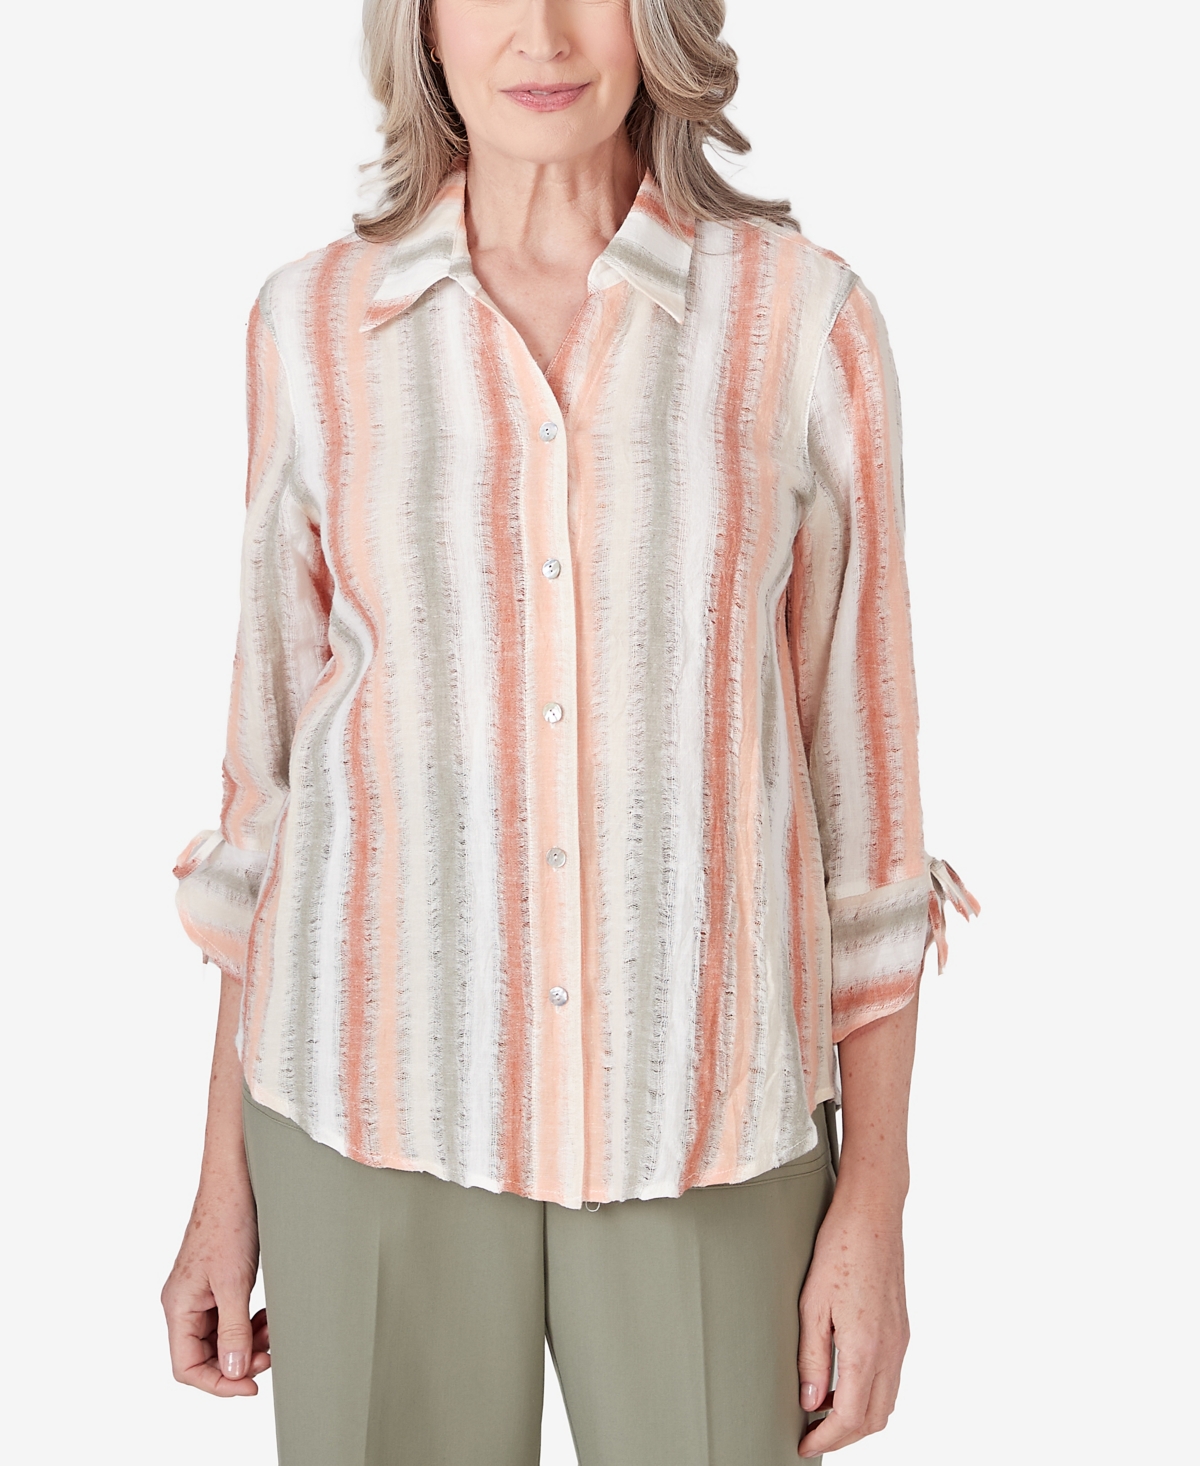 Women's Tuscan Sunset Striped Textured Button Down Top - Multi